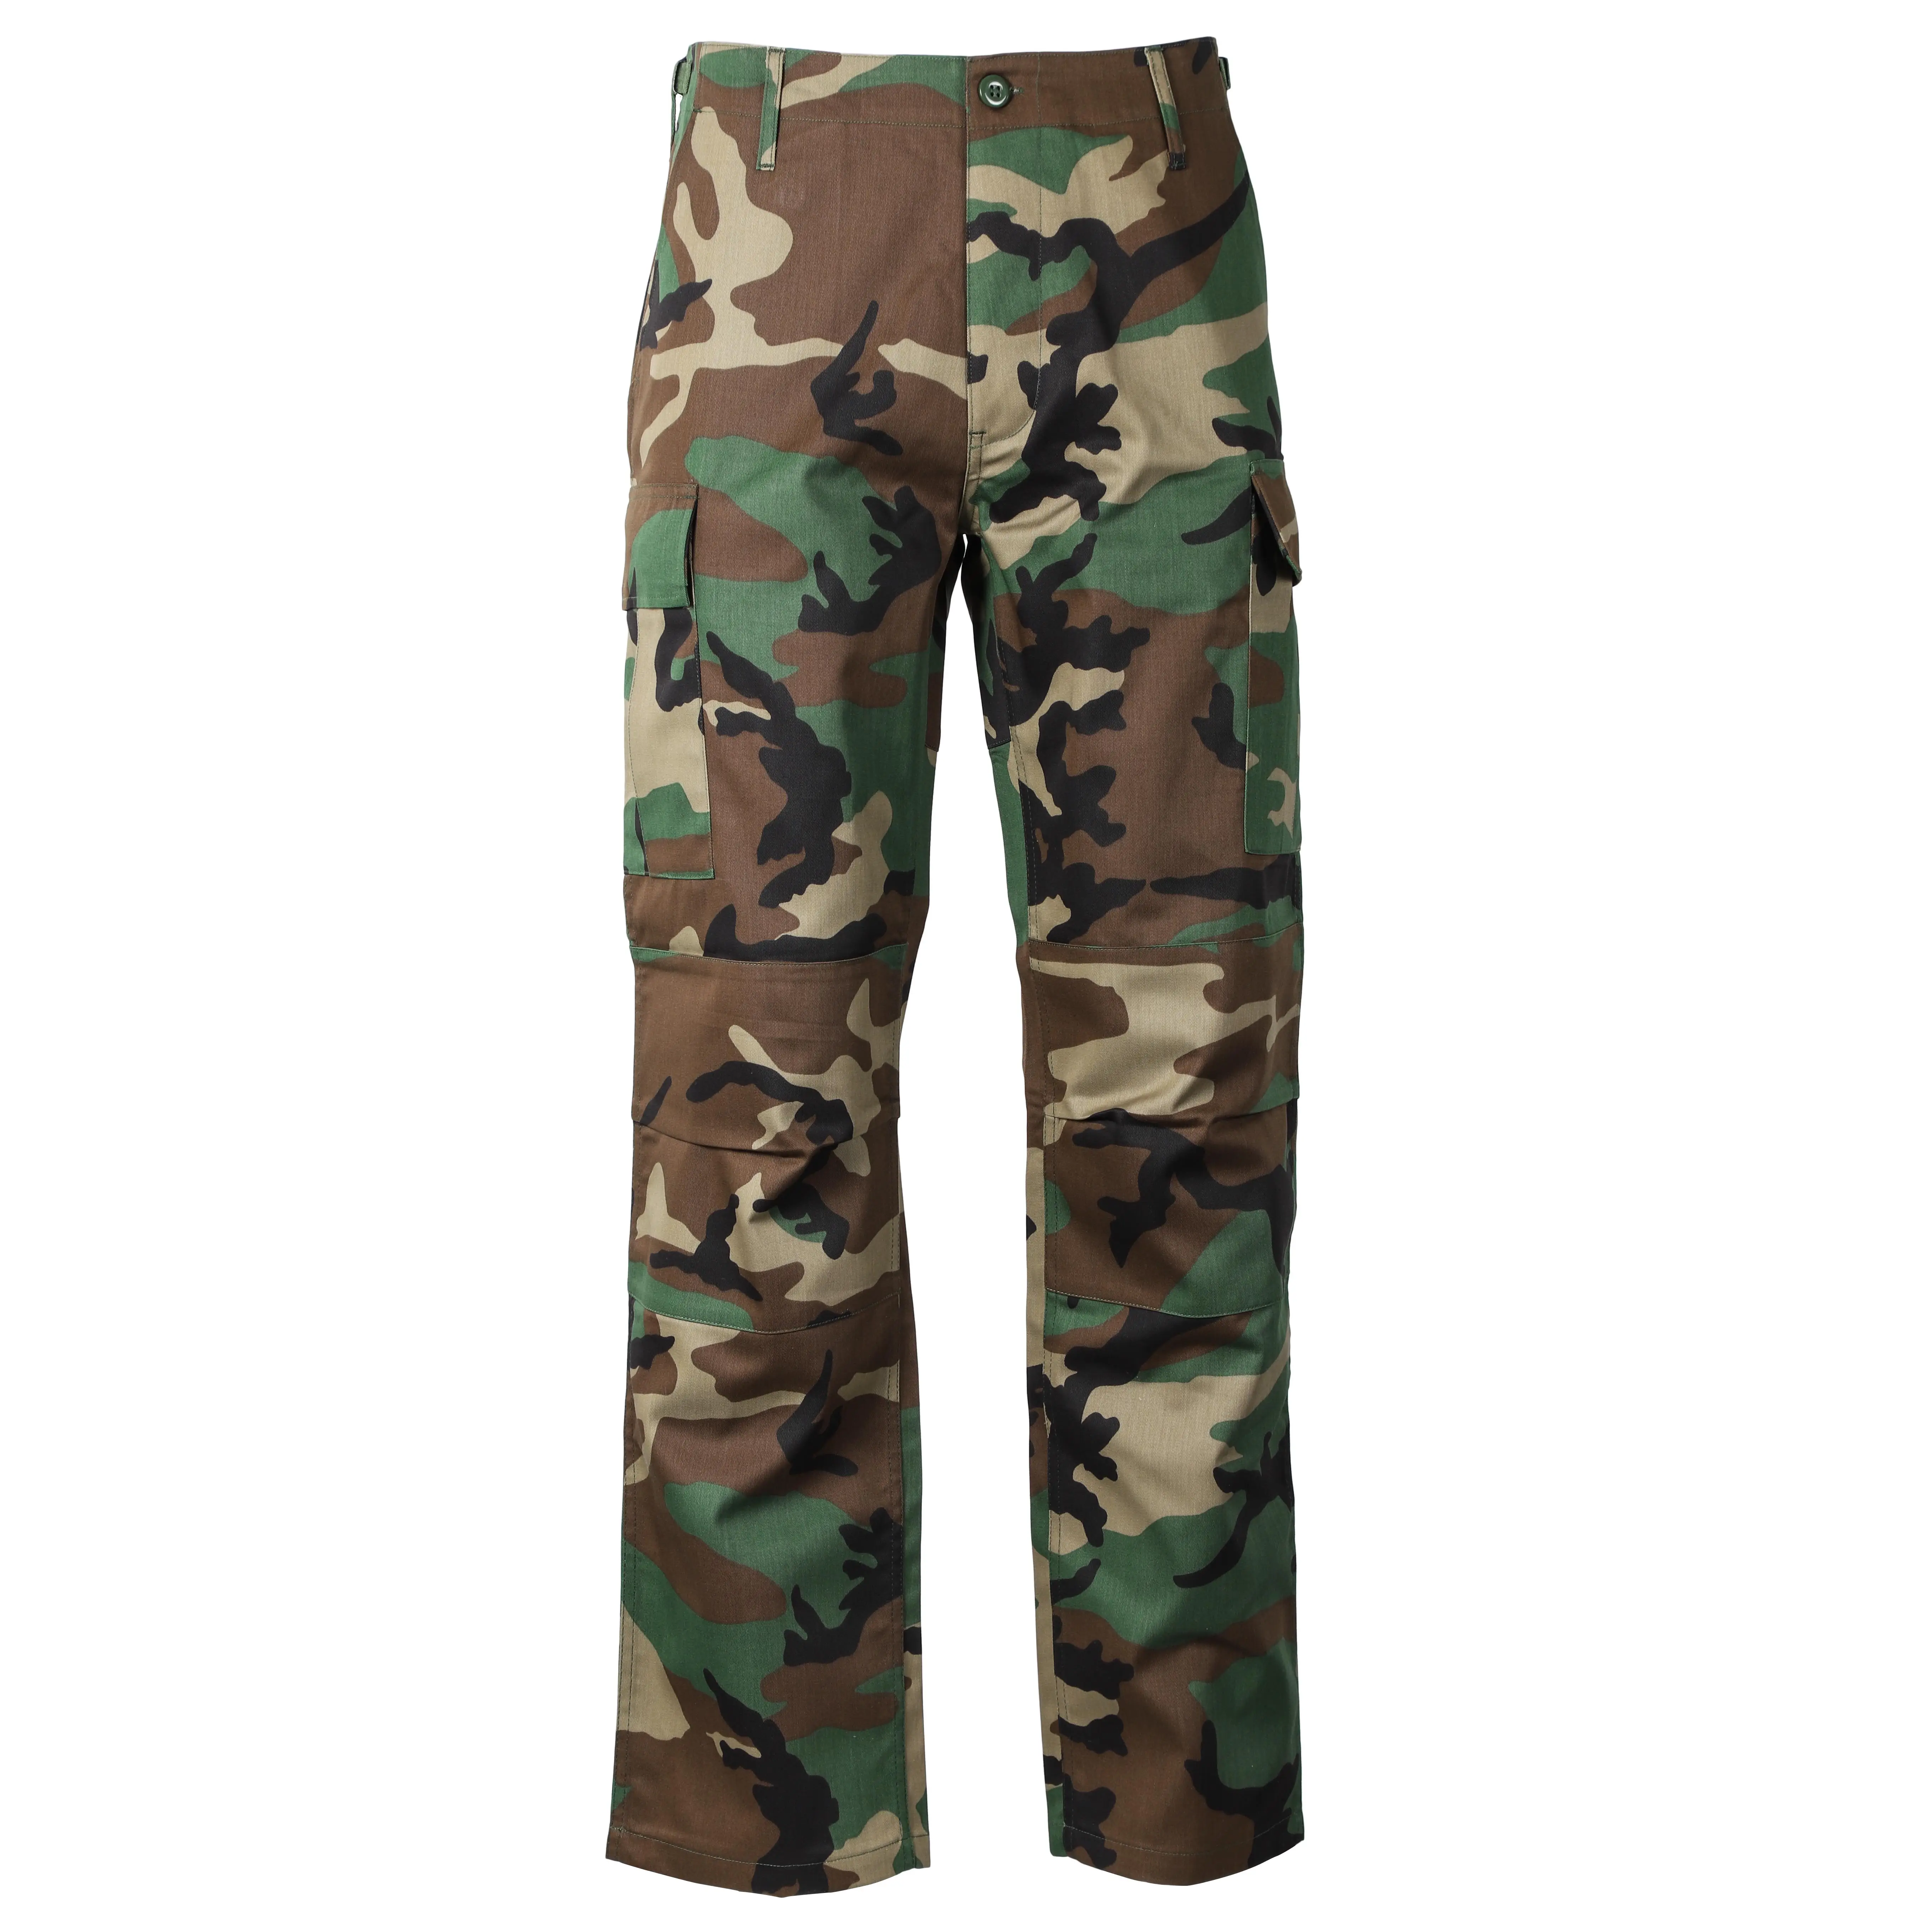 Breathable Quick Dry Pants Sports Polyester Track Pants Outdoor Hunting Camping Spandex Woman Men ACU Woodland Camouflage Pants